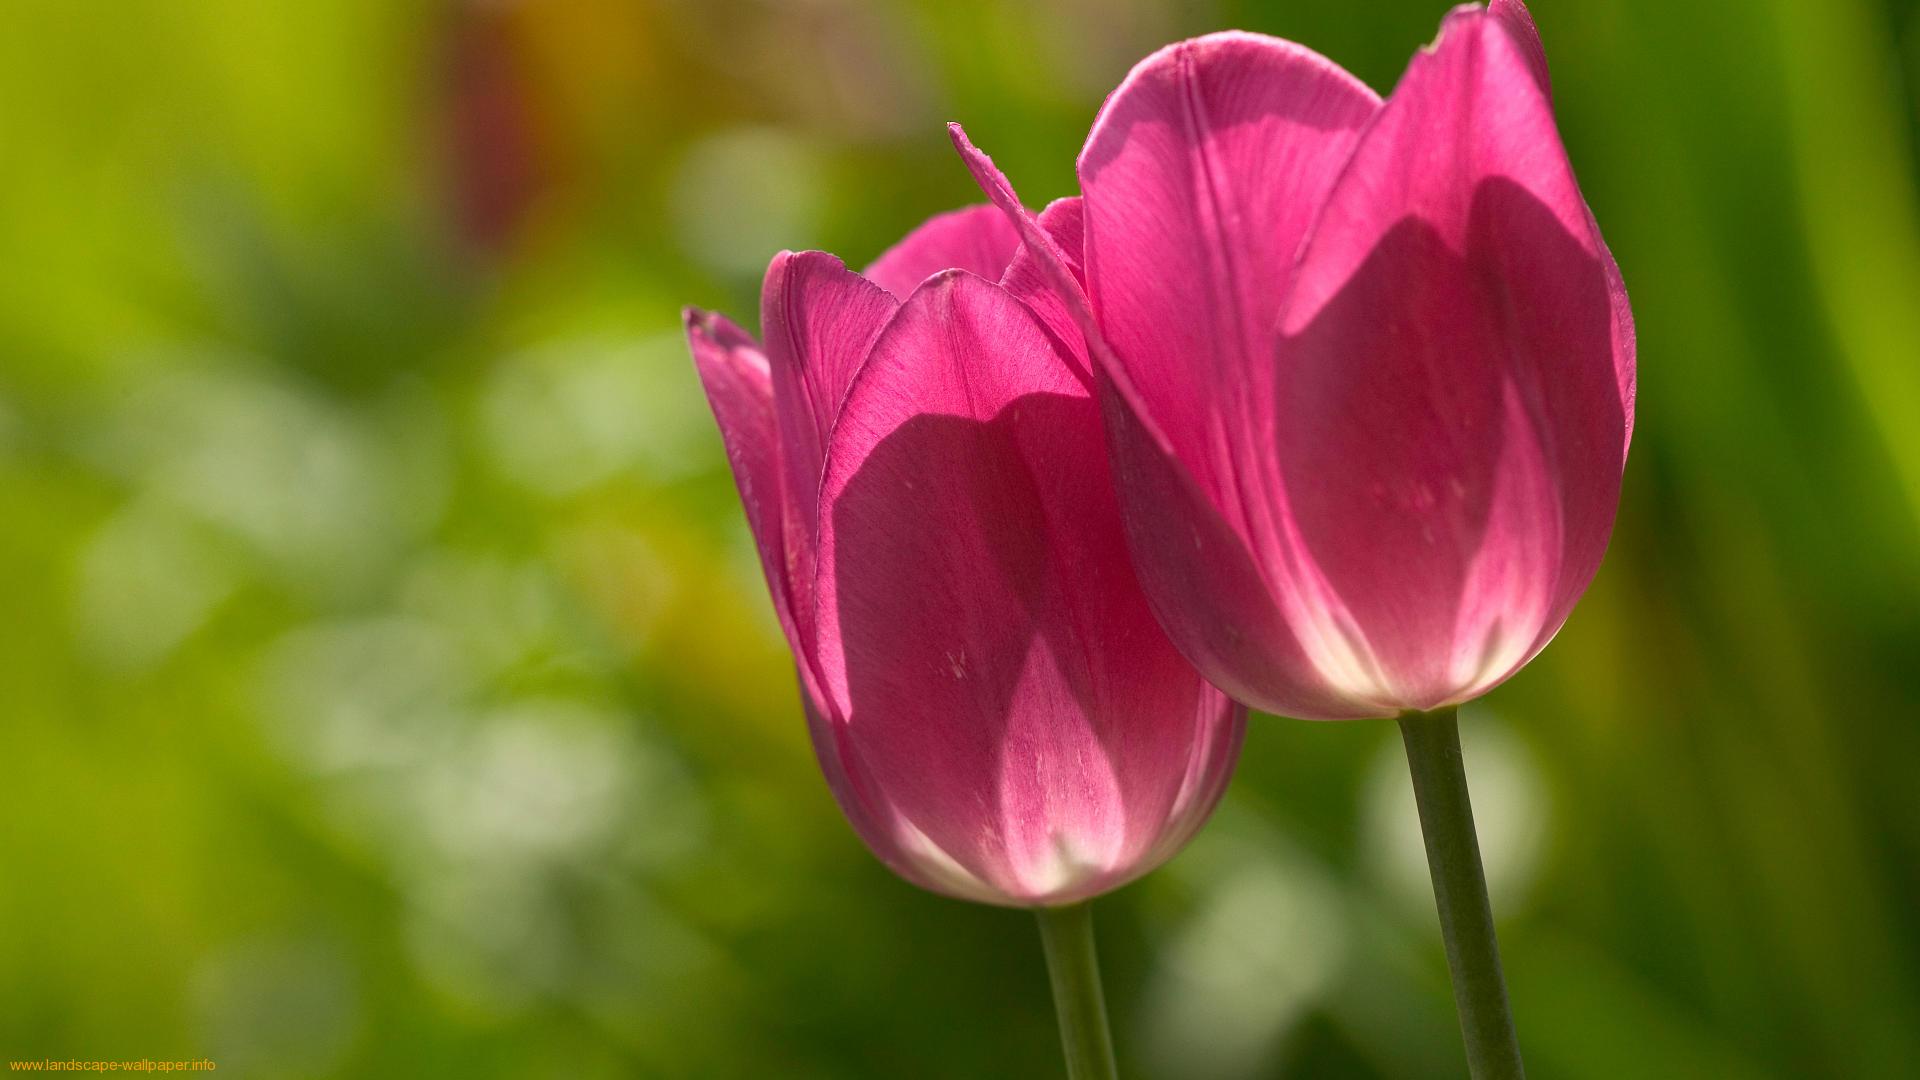 Tulips, wallpaper, images, wmwallpapers (#121015)